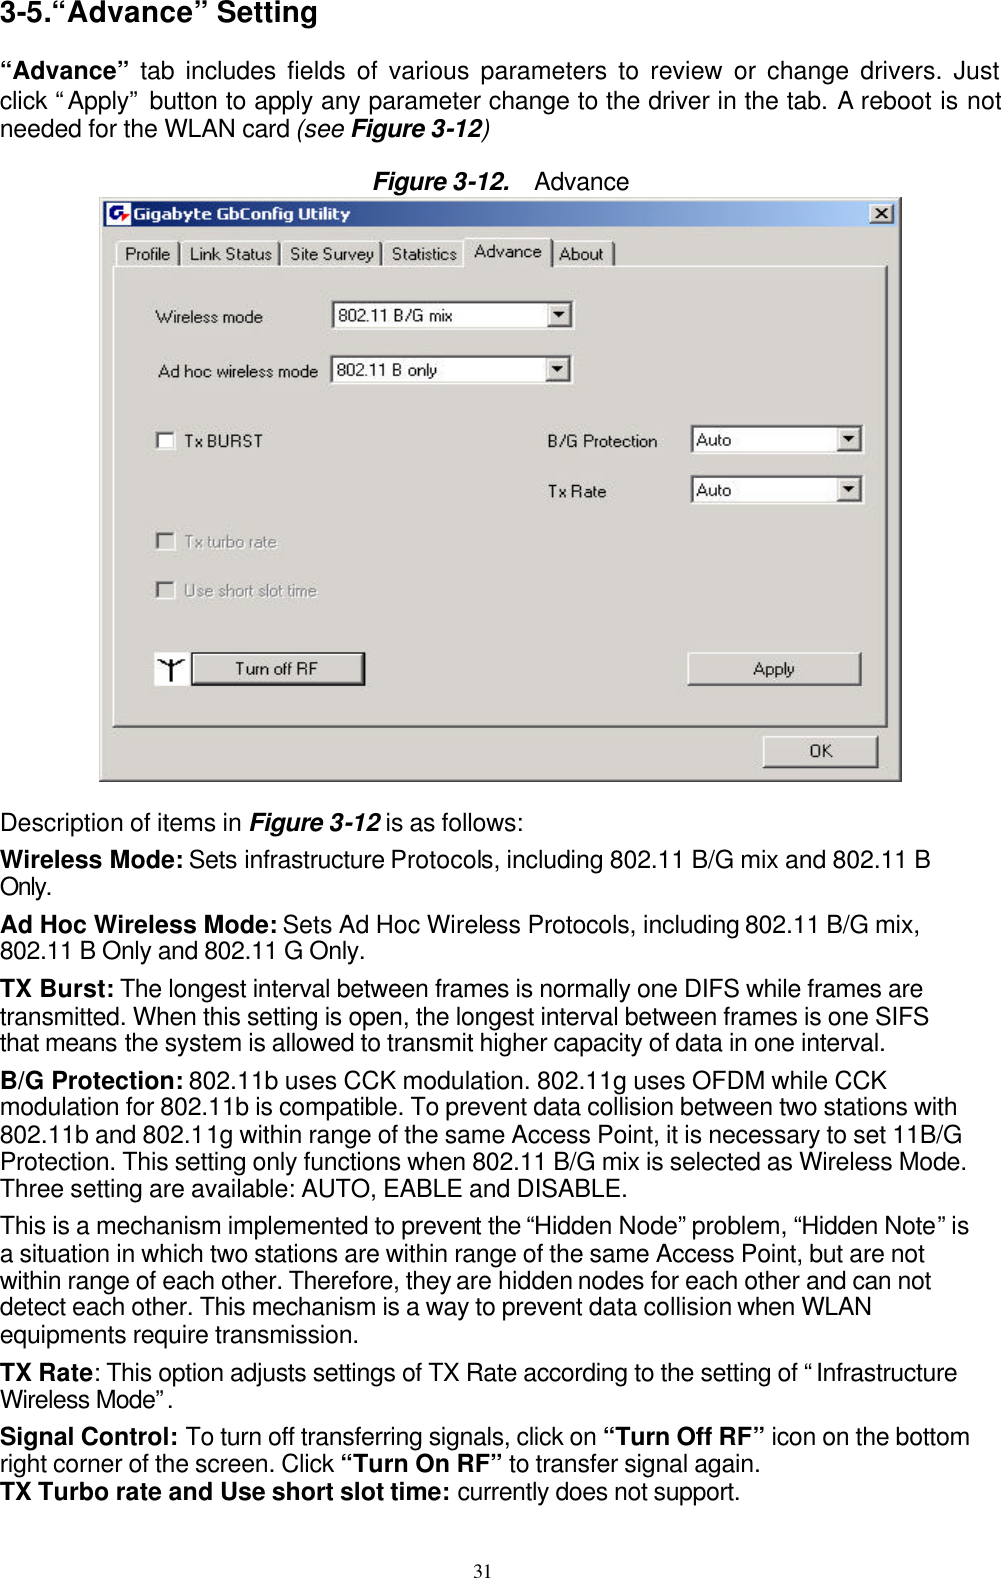 31  3-5.“Advance” Setting  “Advance” tab includes fields of various parameters to review or change drivers. Just click “Apply” button to apply any parameter change to the driver in the tab. A reboot is not needed for the WLAN card (see Figure 3-12)  Figure 3-12.   Advance   Description of items in Figure 3-12 is as follows: Wireless Mode: Sets infrastructure Protocols, including 802.11 B/G mix and 802.11 B Only. Ad Hoc Wireless Mode: Sets Ad Hoc Wireless Protocols, including 802.11 B/G mix, 802.11 B Only and 802.11 G Only. TX Burst: The longest interval between frames is normally one DIFS while frames are transmitted. When this setting is open, the longest interval between frames is one SIFS that means the system is allowed to transmit higher capacity of data in one interval. B/G Protection: 802.11b uses CCK modulation. 802.11g uses OFDM while CCK modulation for 802.11b is compatible. To prevent data collision between two stations with 802.11b and 802.11g within range of the same Access Point, it is necessary to set 11B/G Protection. This setting only functions when 802.11 B/G mix is selected as Wireless Mode. Three setting are available: AUTO, EABLE and DISABLE. This is a mechanism implemented to prevent the “Hidden Node” problem, “Hidden Note” is a situation in which two stations are within range of the same Access Point, but are not within range of each other. Therefore, they are hidden nodes for each other and can not detect each other. This mechanism is a way to prevent data collision when WLAN equipments require transmission. TX Rate: This option adjusts settings of TX Rate according to the setting of “Infrastructure Wireless Mode”.  Signal Control: To turn off transferring signals, click on “Turn Off RF” icon on the bottom right corner of the screen. Click “Turn On RF” to transfer signal again. TX Turbo rate and Use short slot time: currently does not support. 